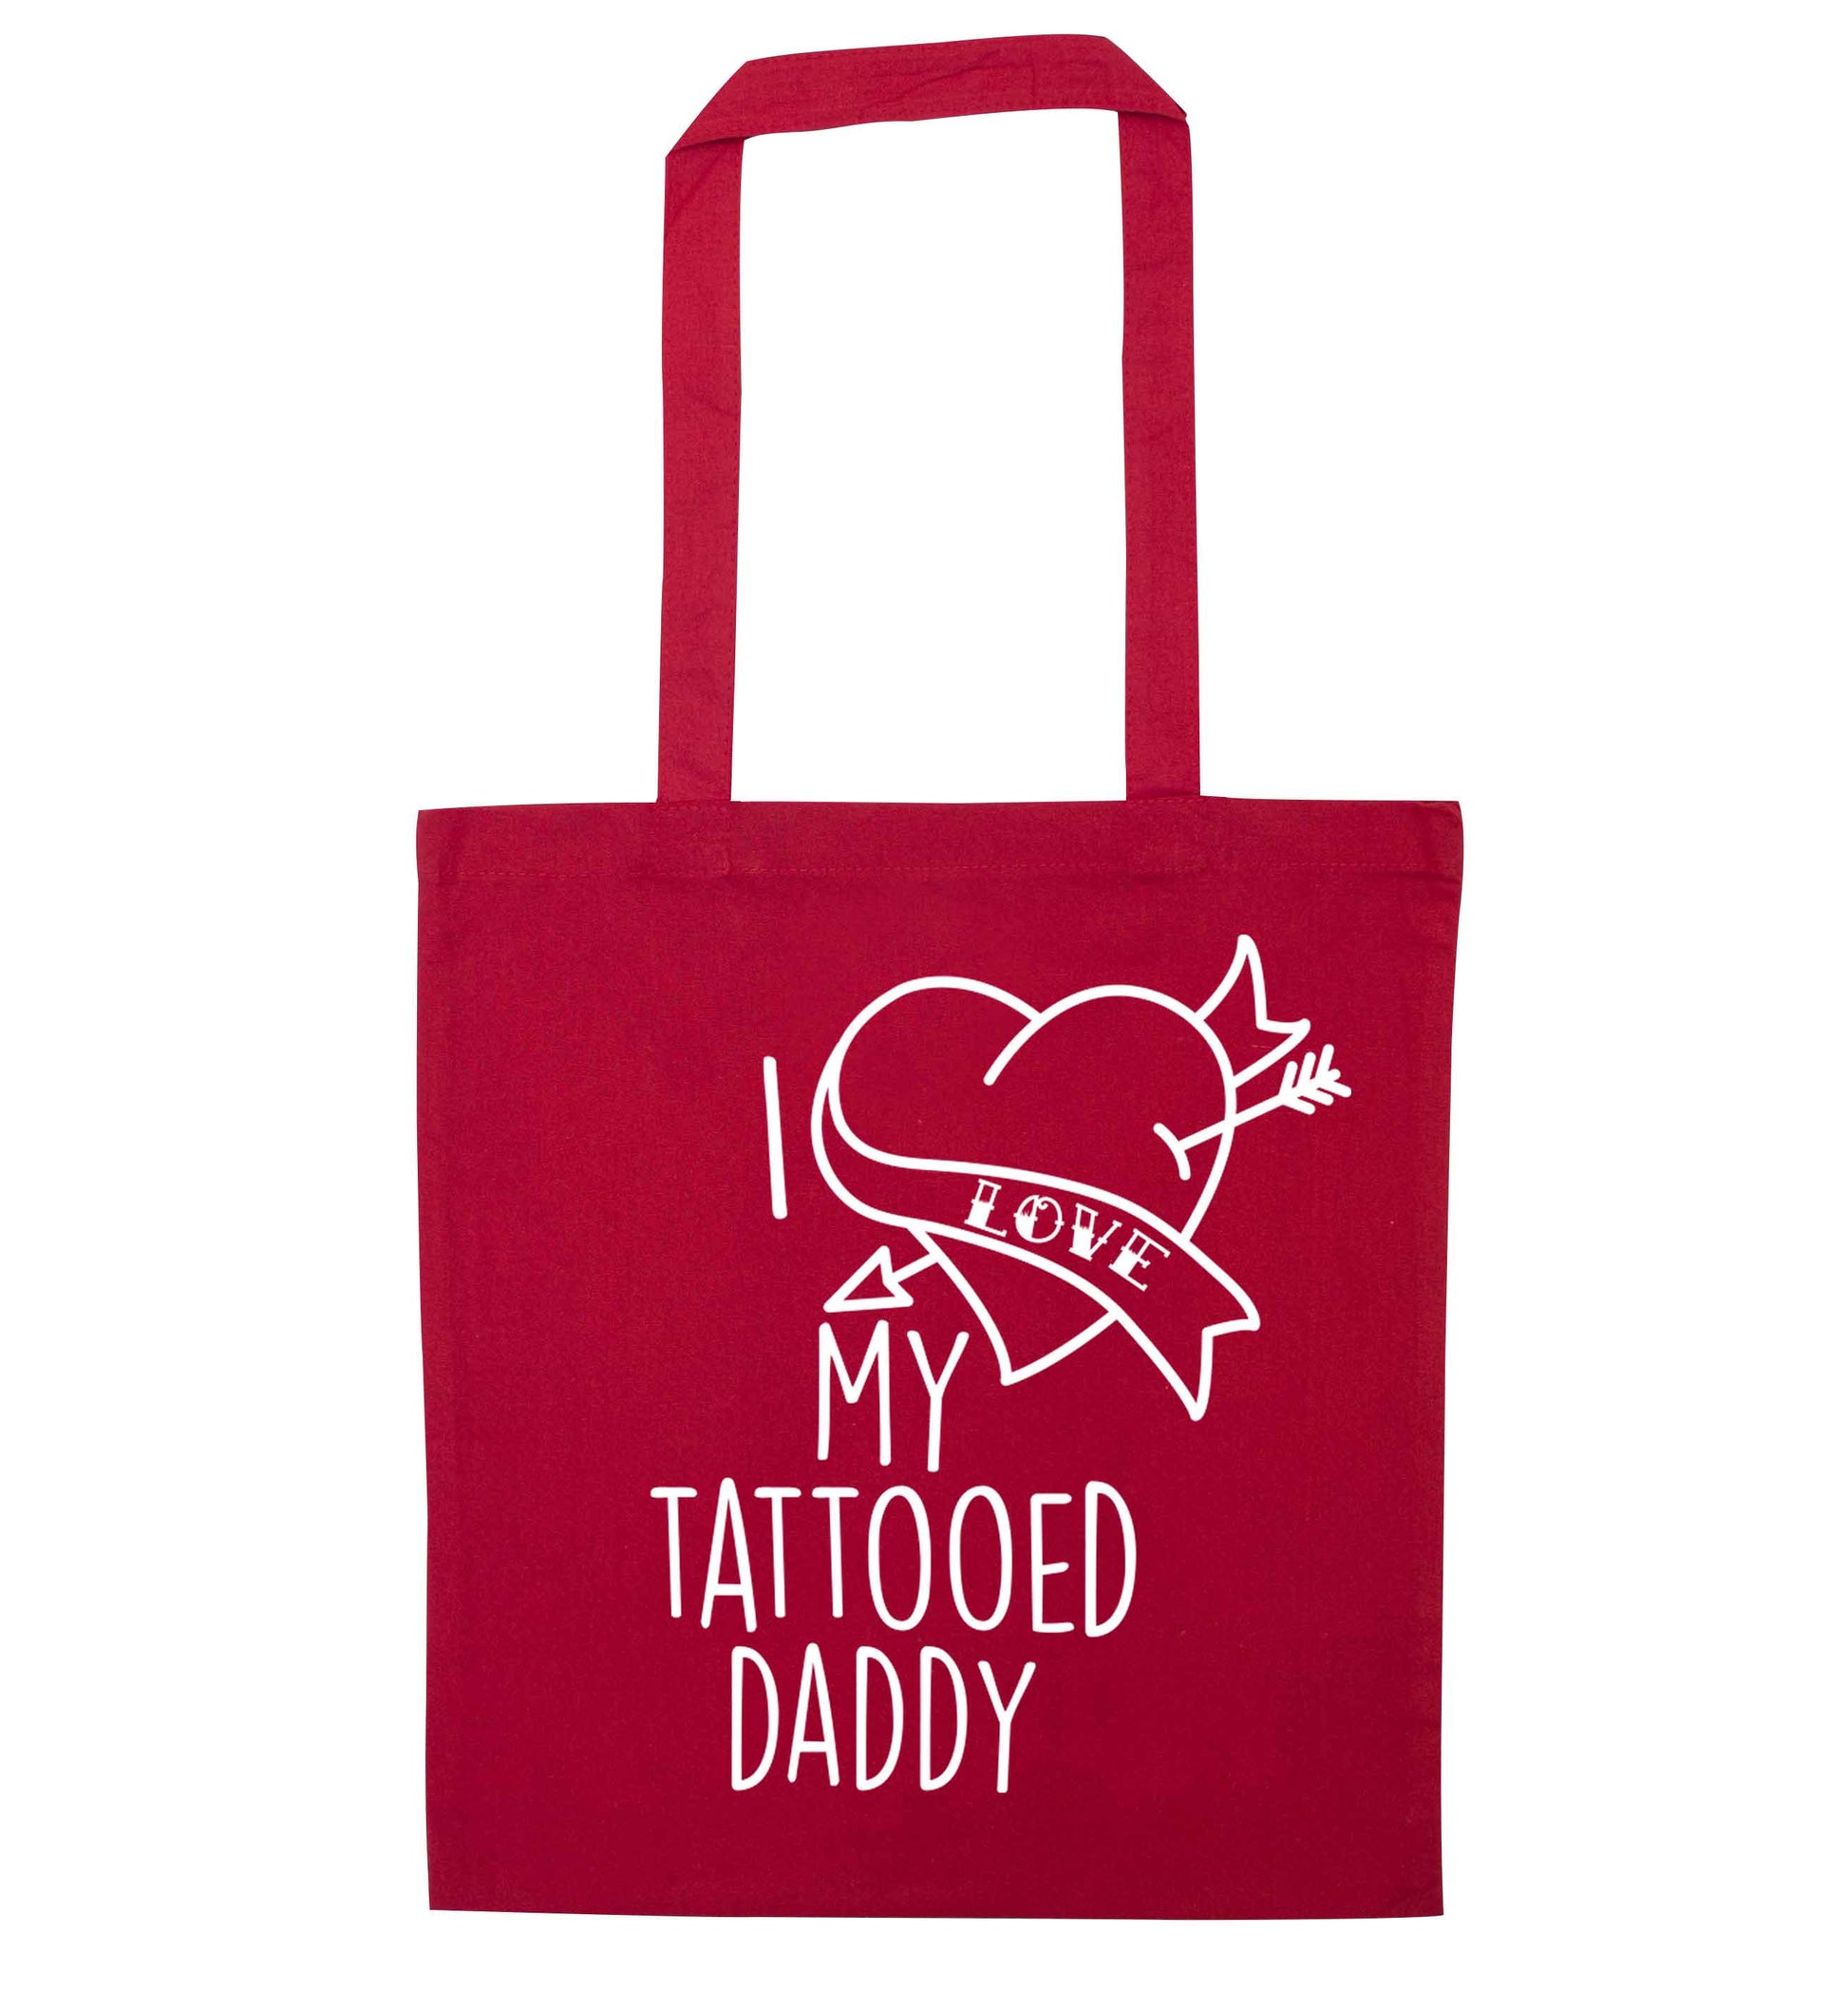 I love my tattooed daddy red tote bag